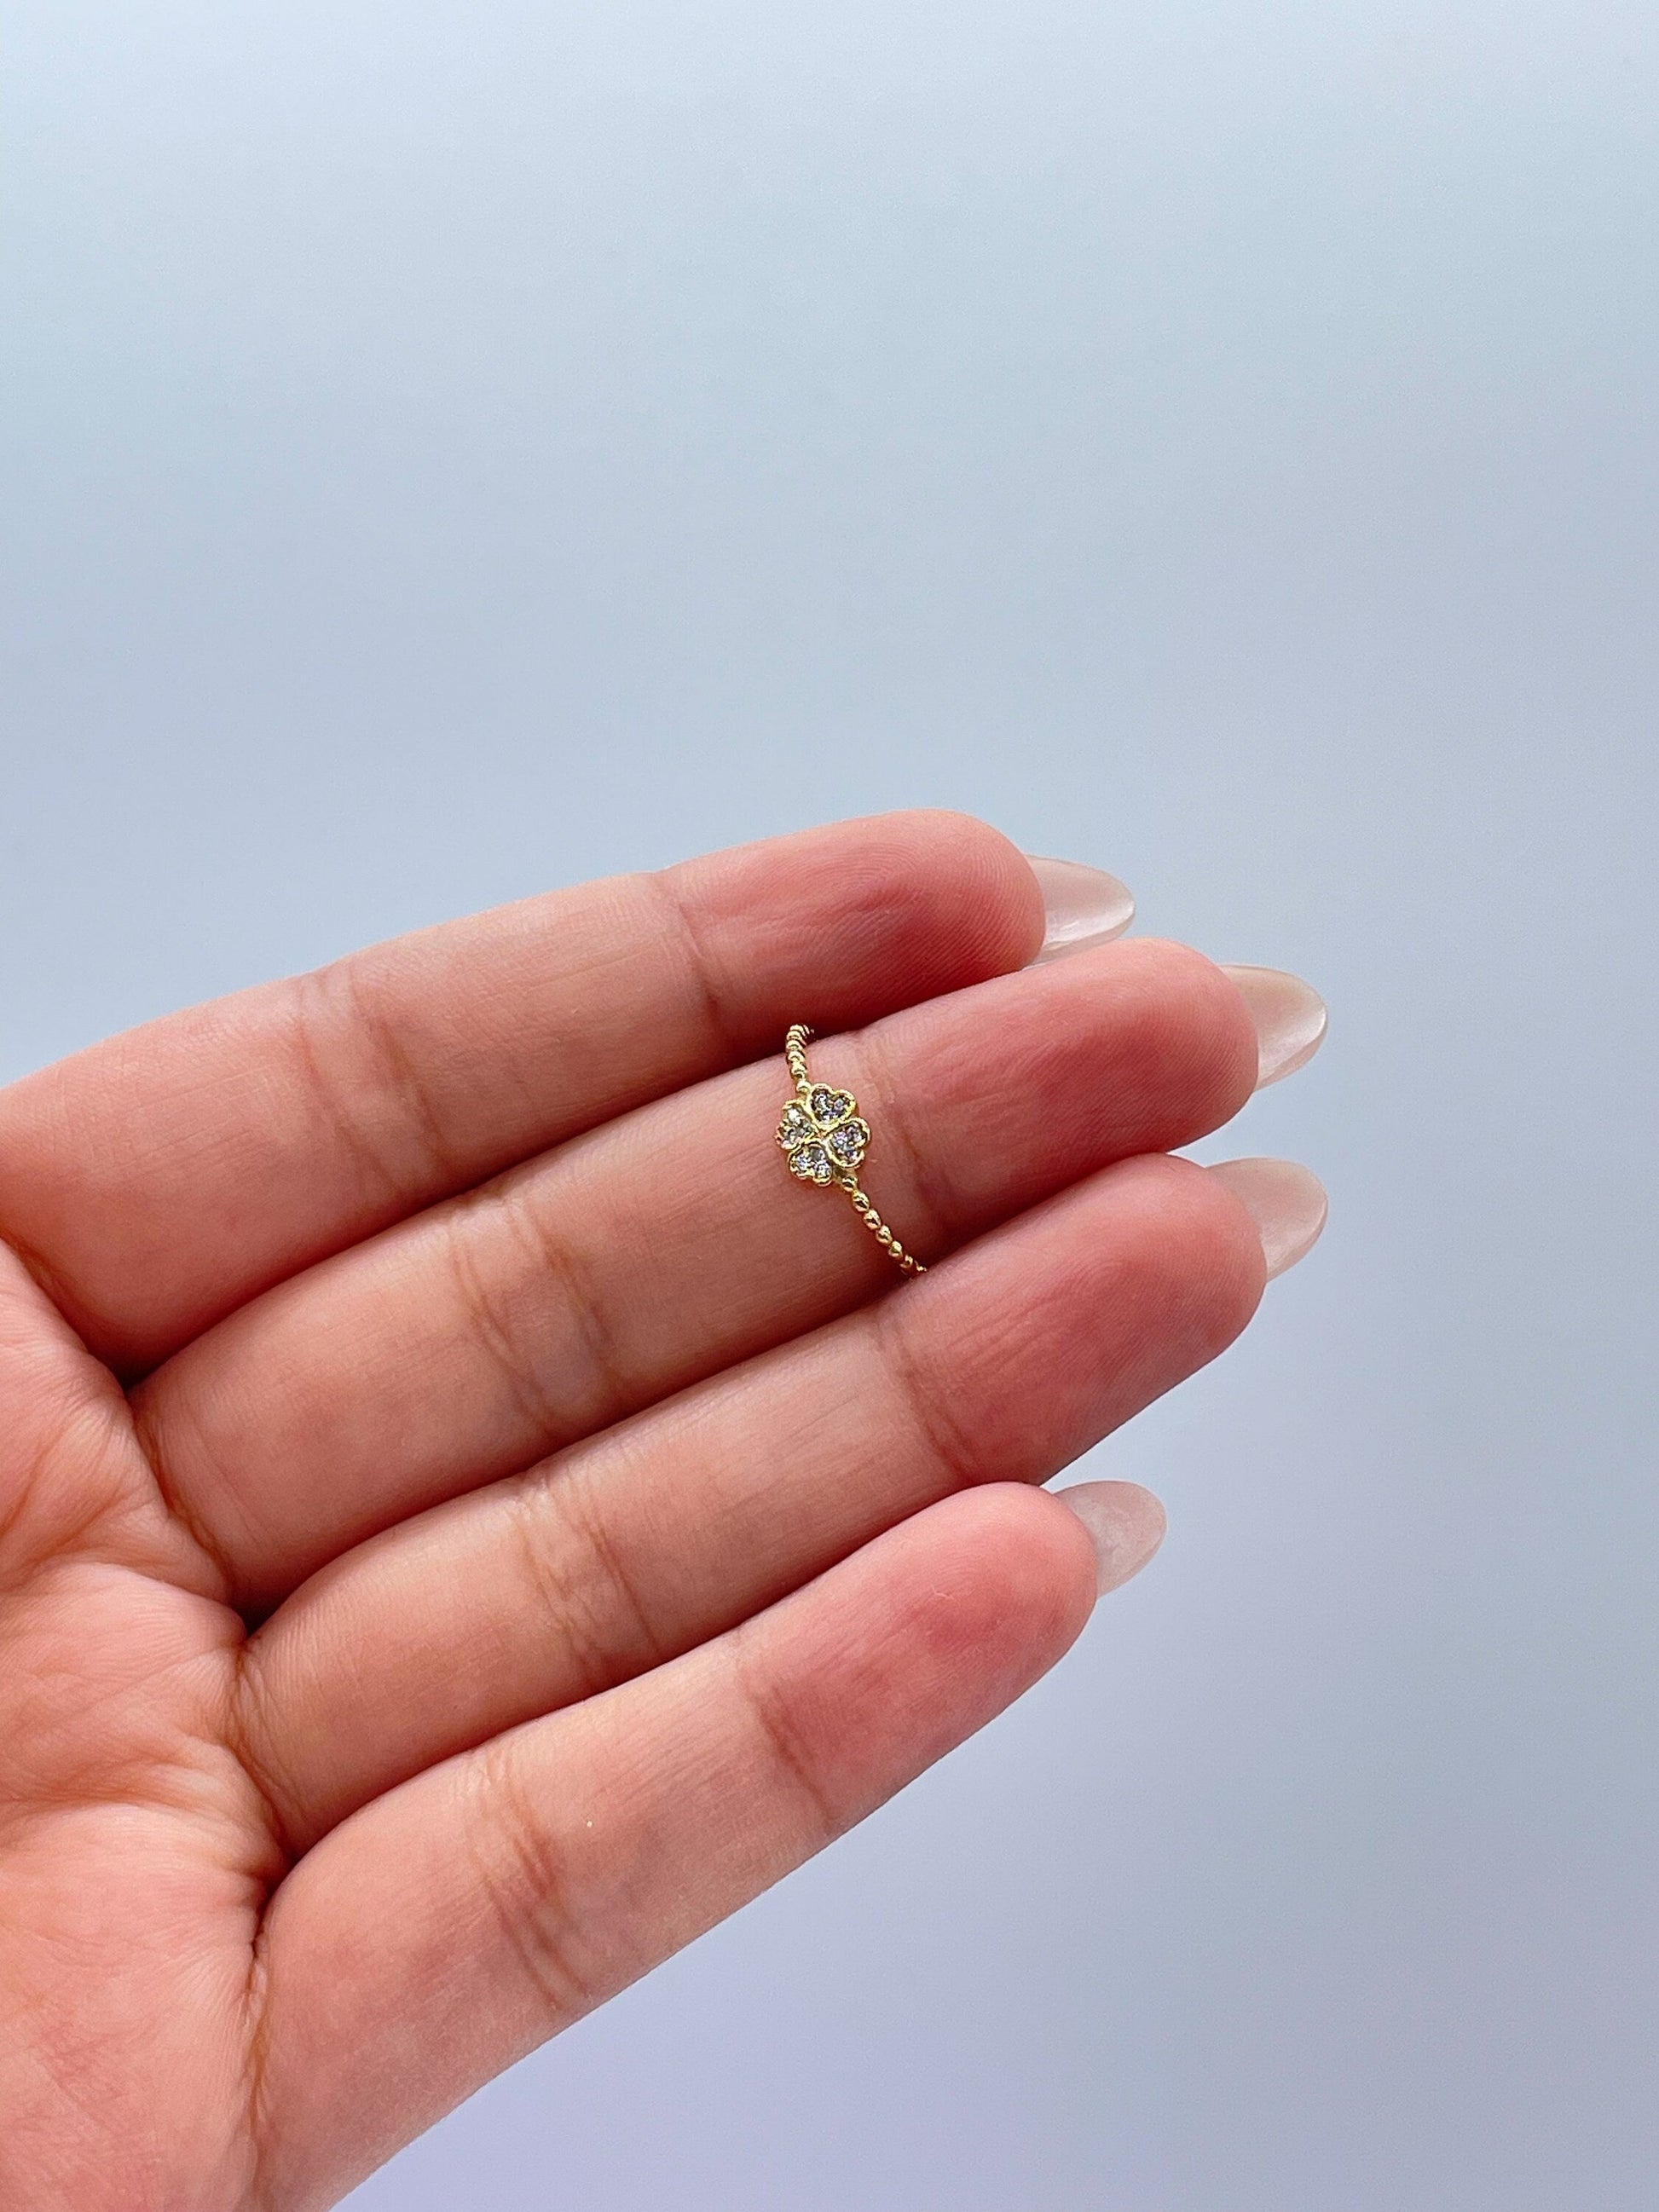 18k Goldfilled Mid Beaded Band Pave Four Leaf Clover Ring Wedding Gift, For her , Gift Idea Dainty Ring,Minimalist Jewlery Statement Piece